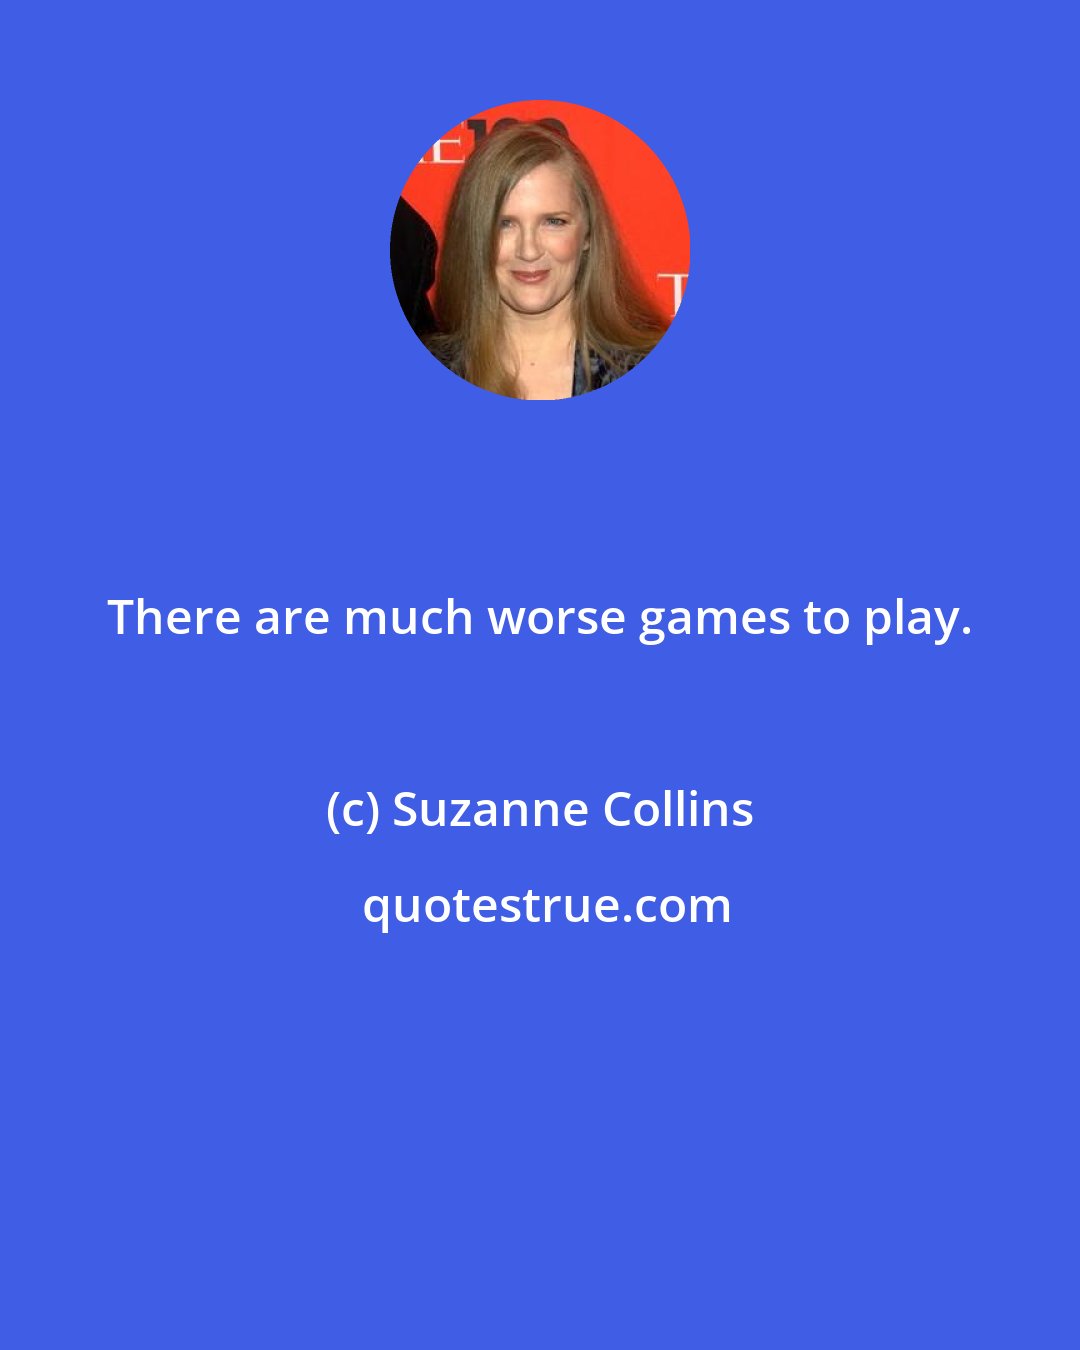 Suzanne Collins: There are much worse games to play.